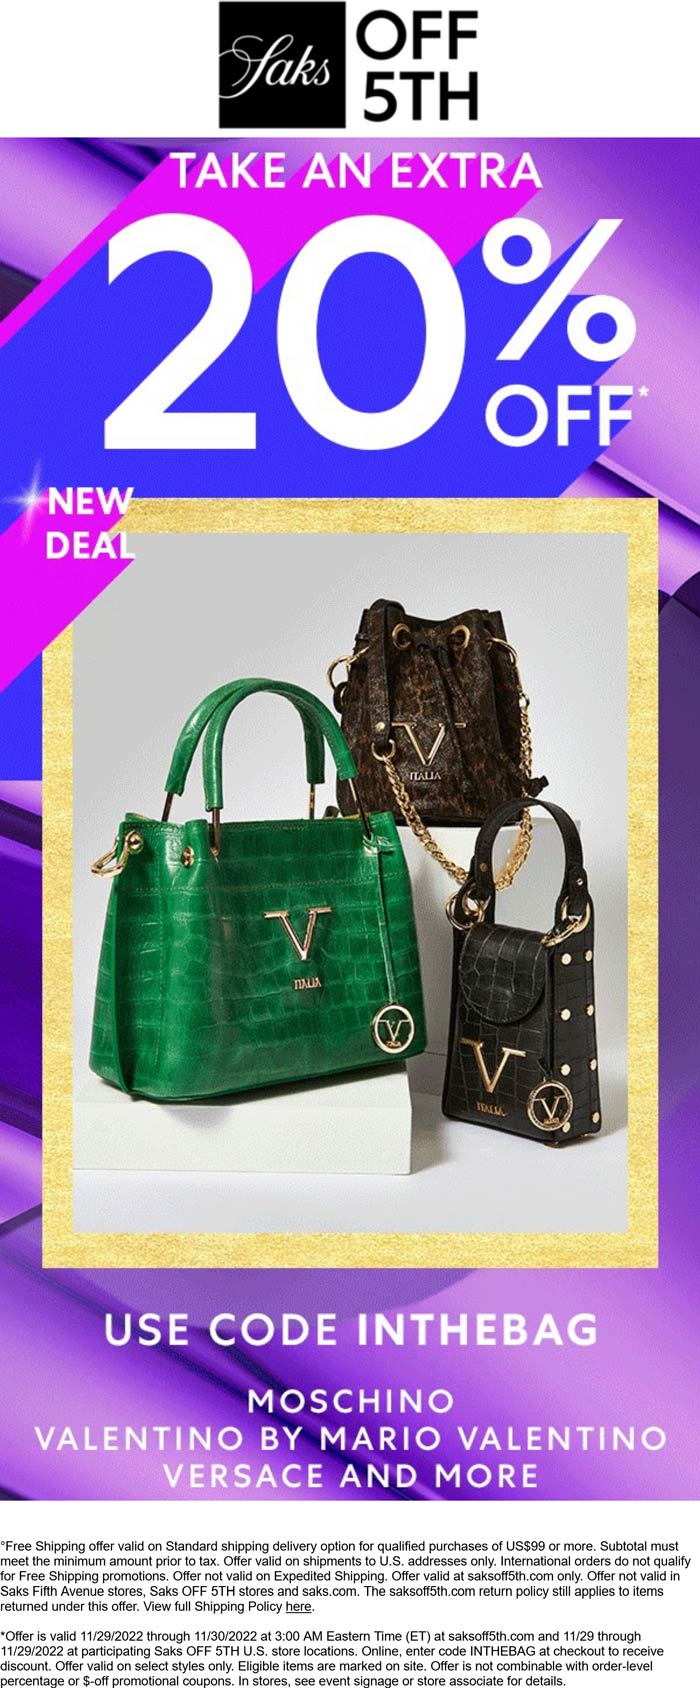 OFF 5TH stores Coupon  20% off bags by Moschino Versace & more today at Saks OFF 5TH via promo code INTHEBAG #off5th 